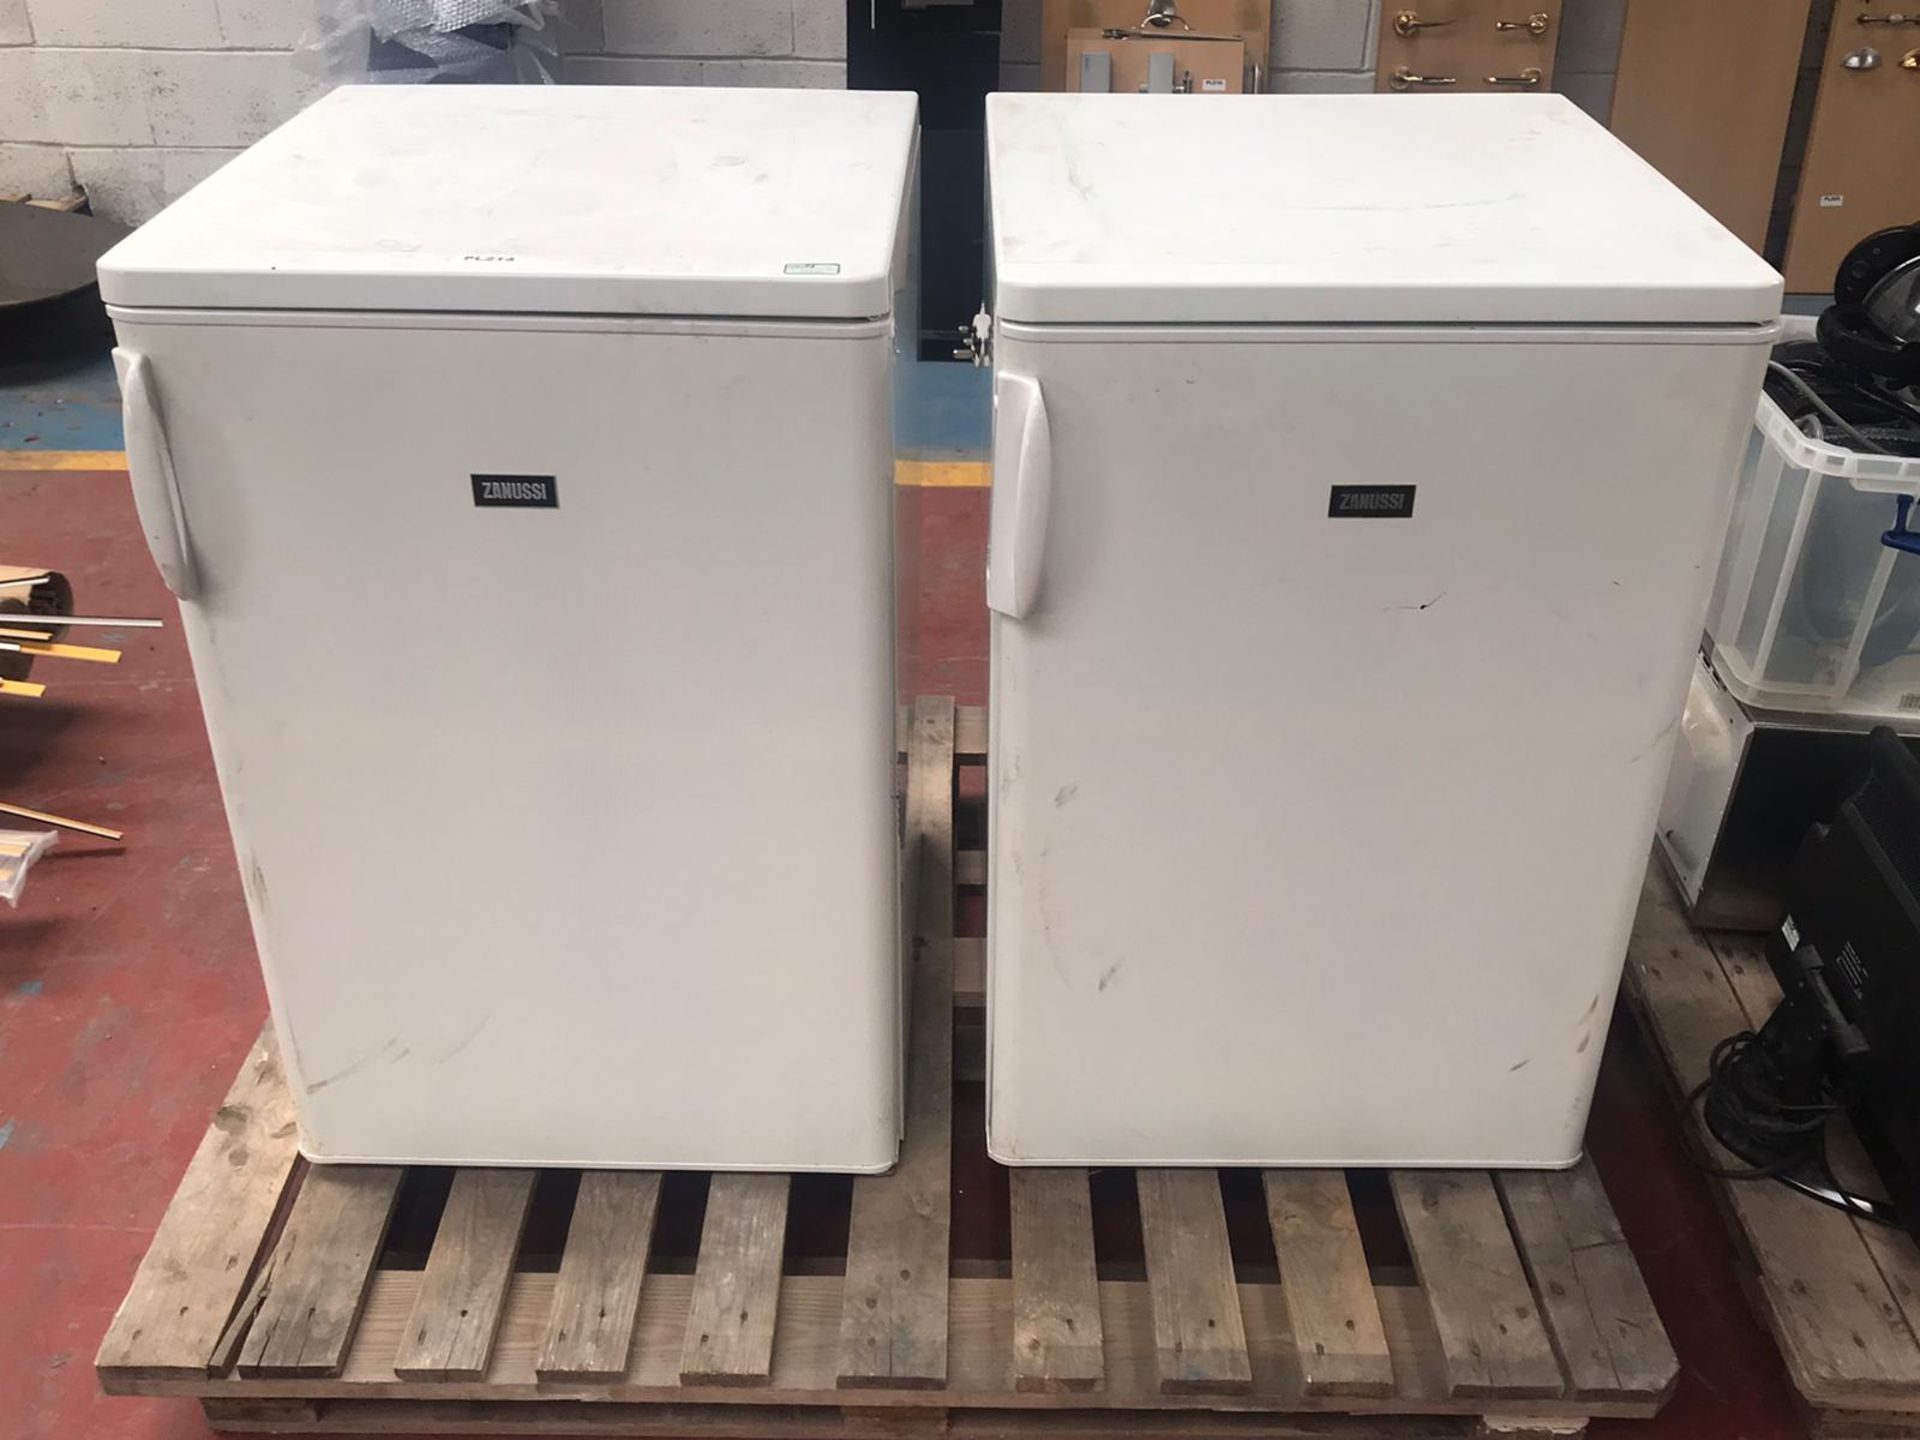 2 x Zanussi Undercounter Fridges - Removed From a Working Environment - Product Code: N/A -